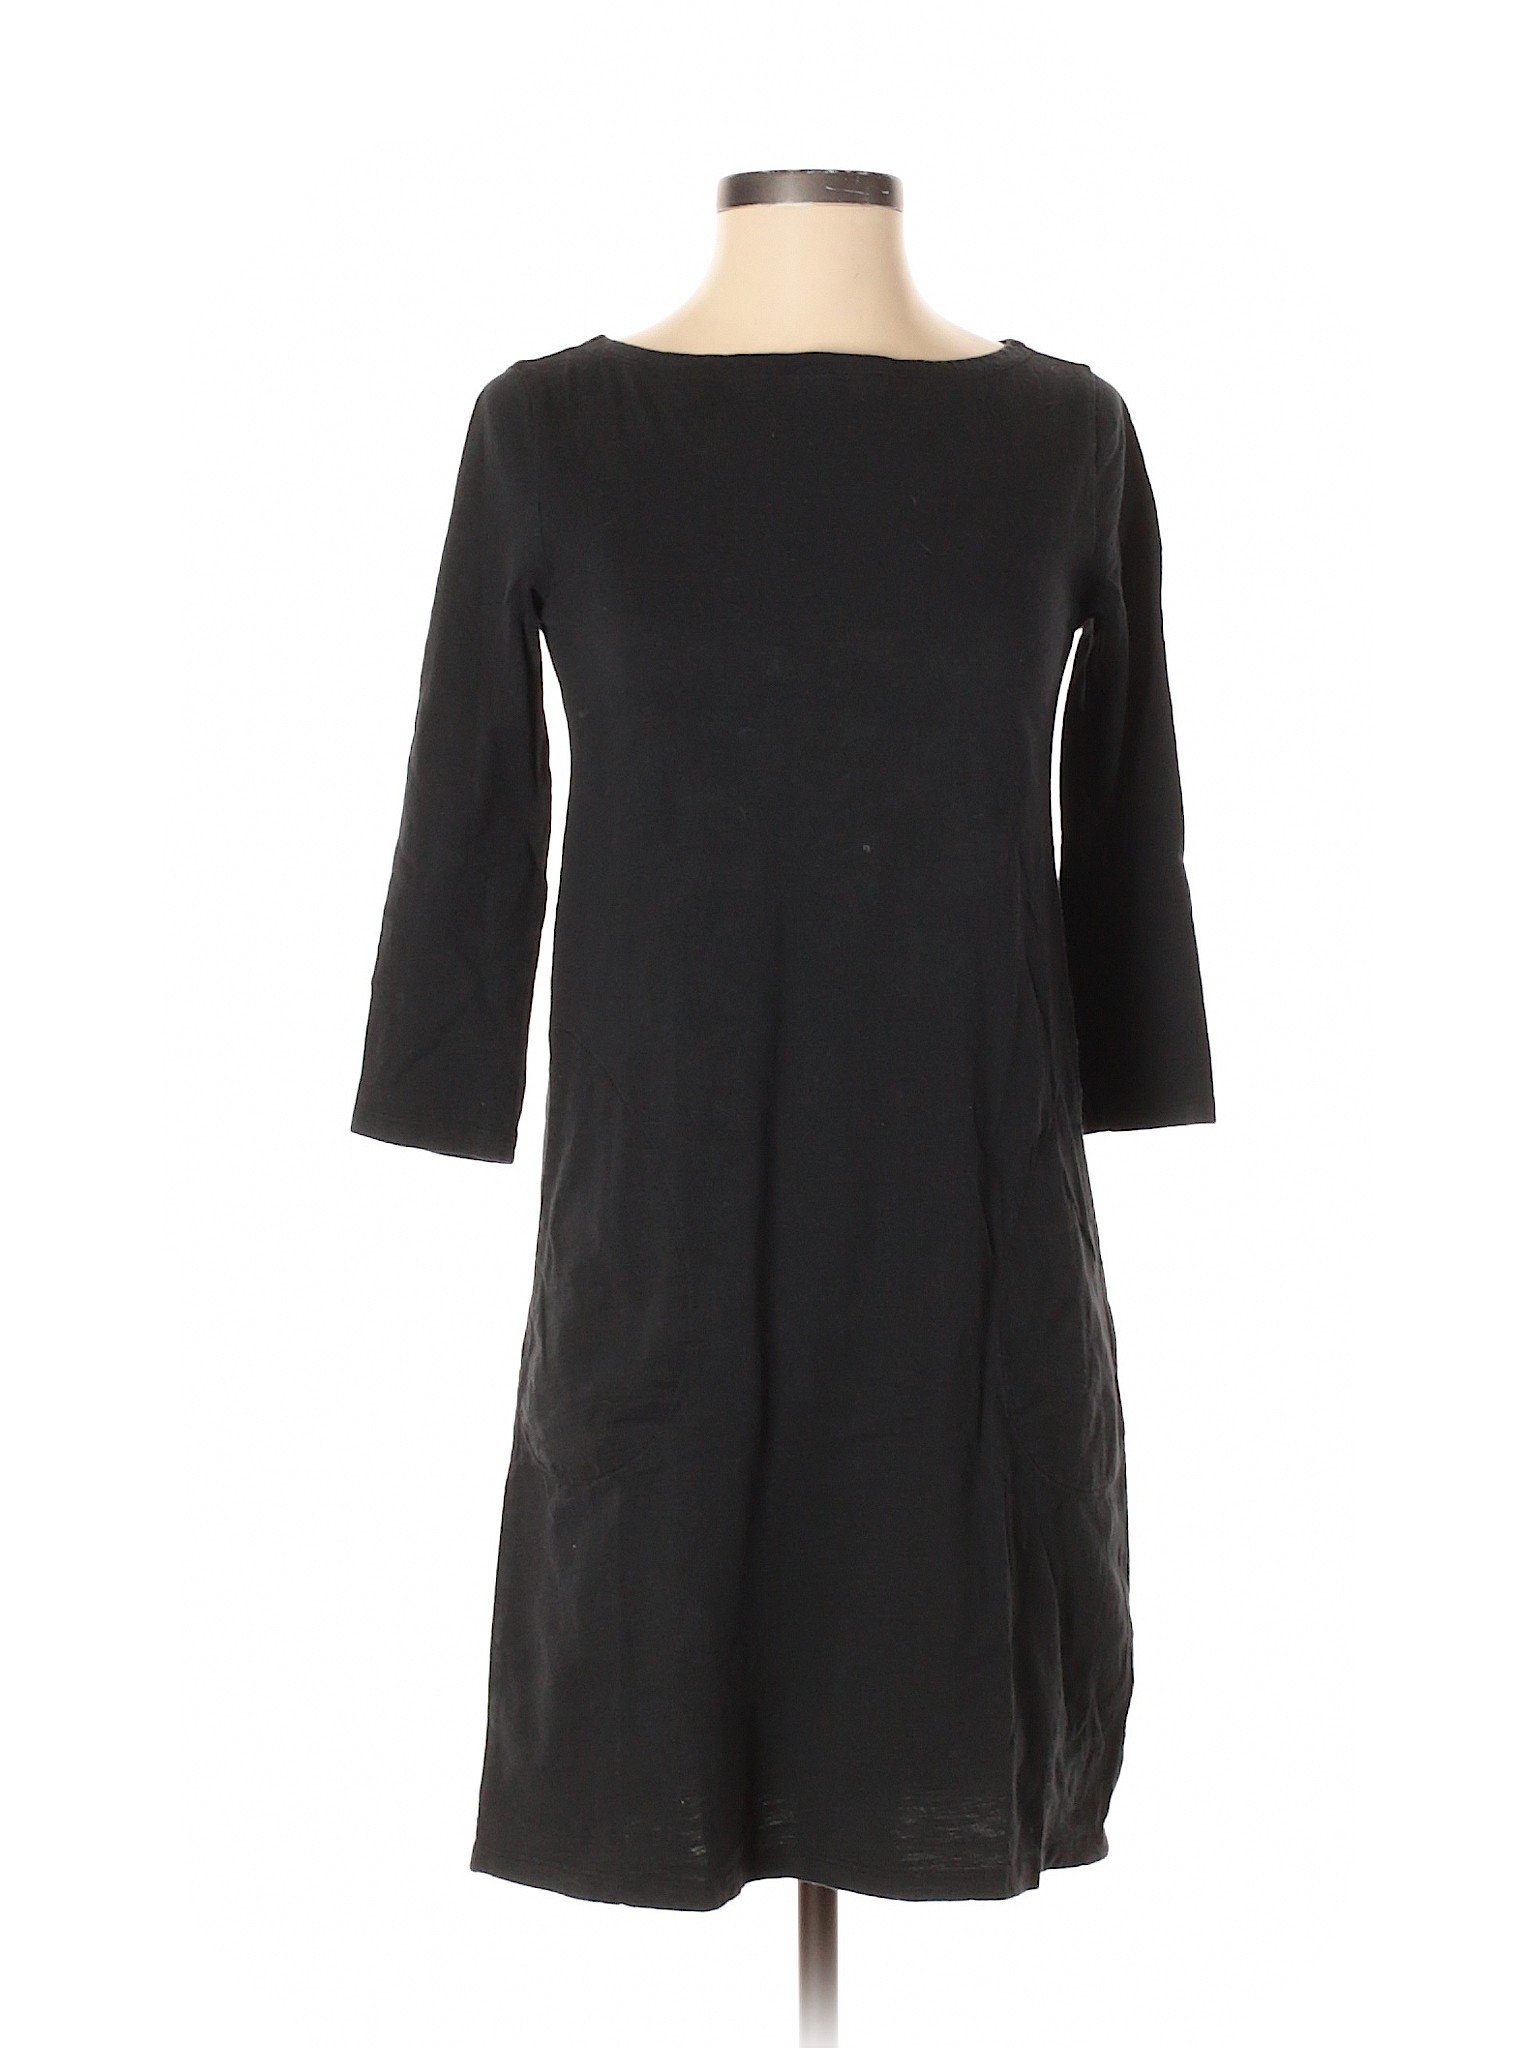 Garnet Hill 100% Cotton Solid Black Casual Dress Size 00 - 91% off ...